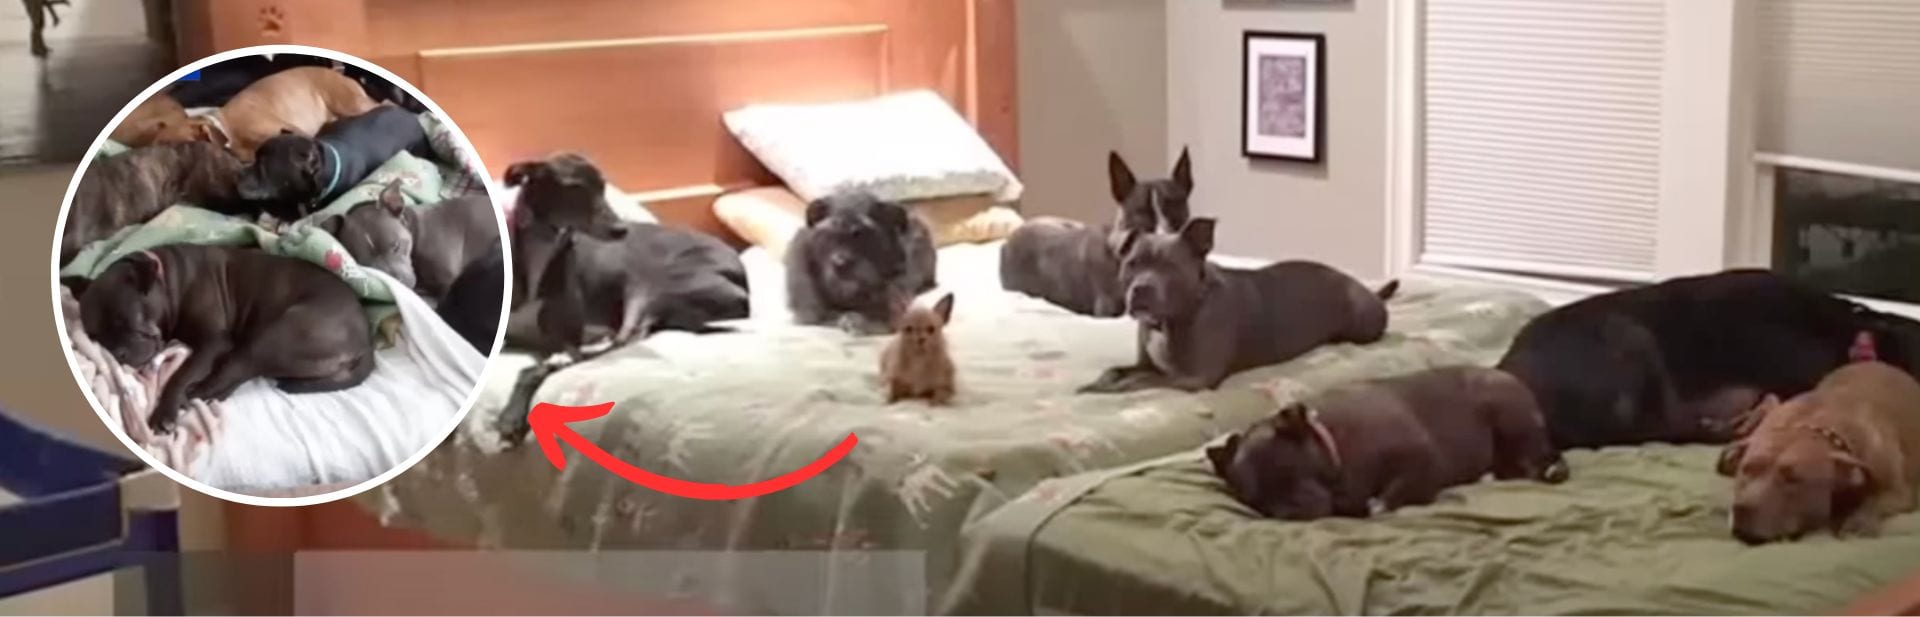 Snuggle Time Multiplied as Couple Builds Big Cozy Bed to Share with Their 8 Loving Dogs